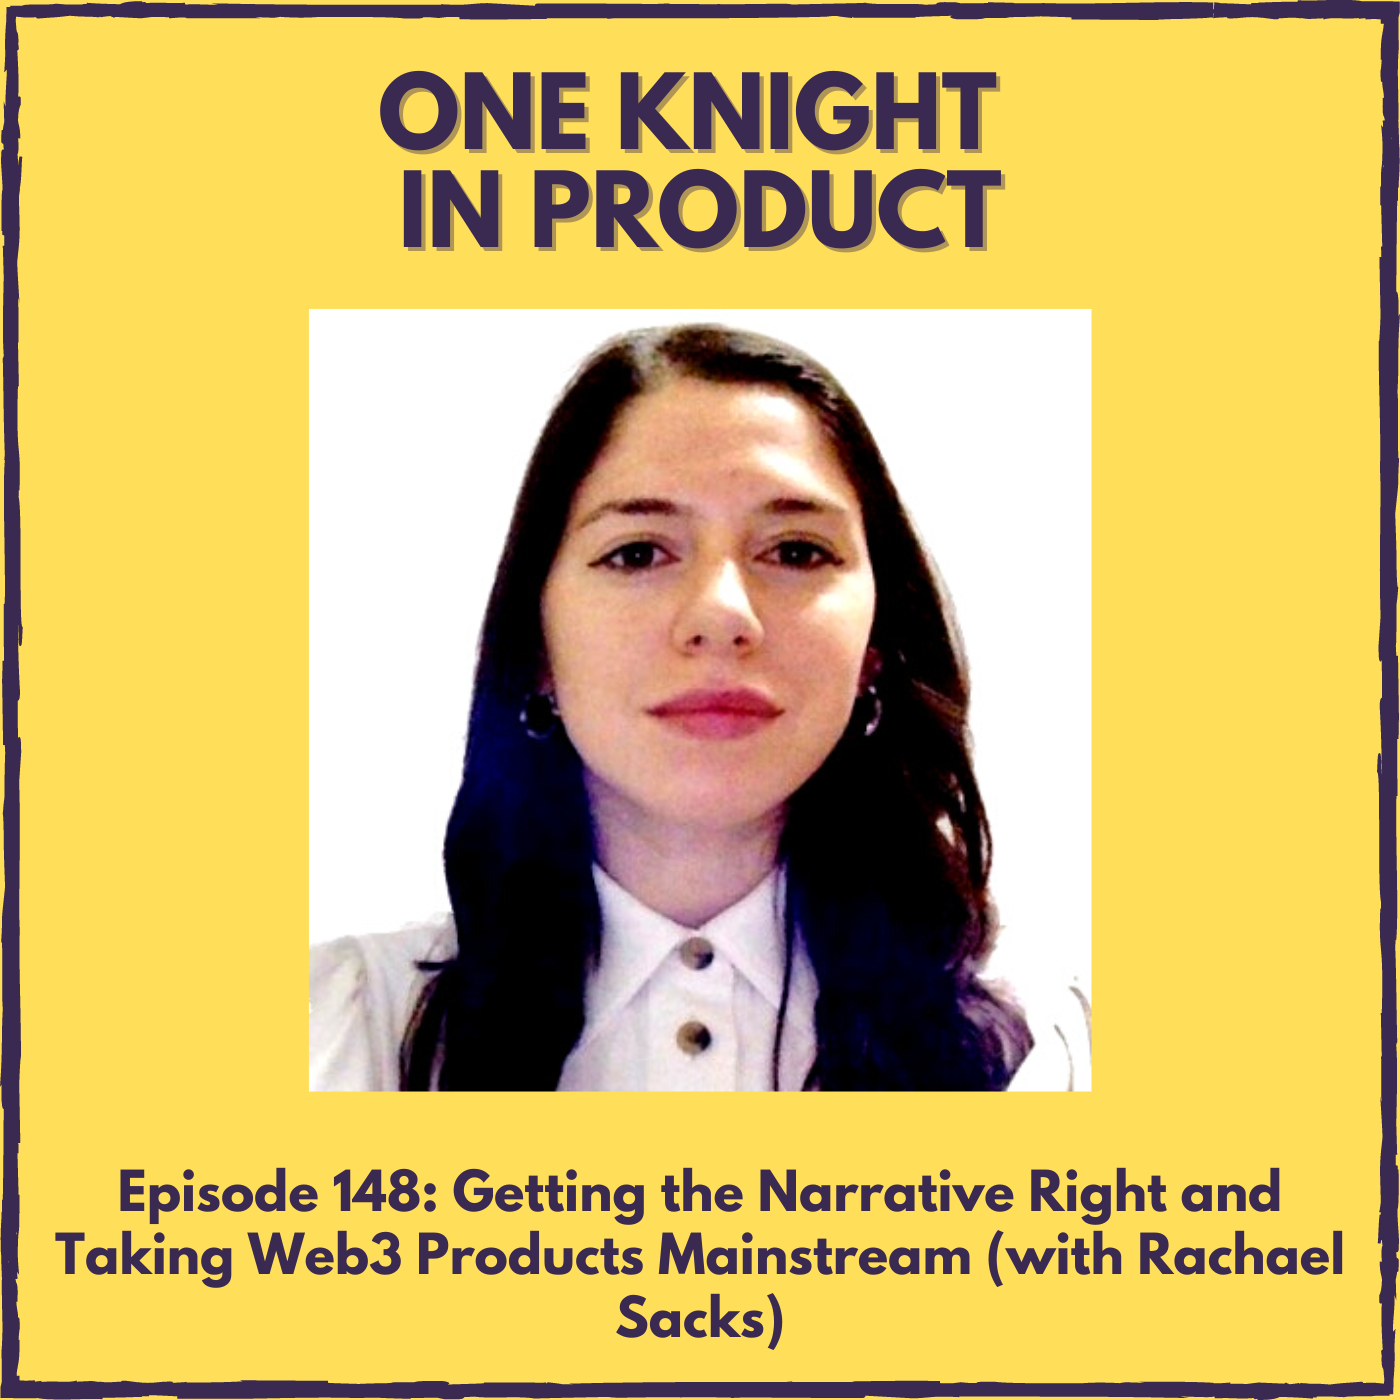 Getting the Narrative Right and Taking Web3 Products Mainstream (with Rachael Sacks, Crypto Storyteller & Founder @ Narrativ3)